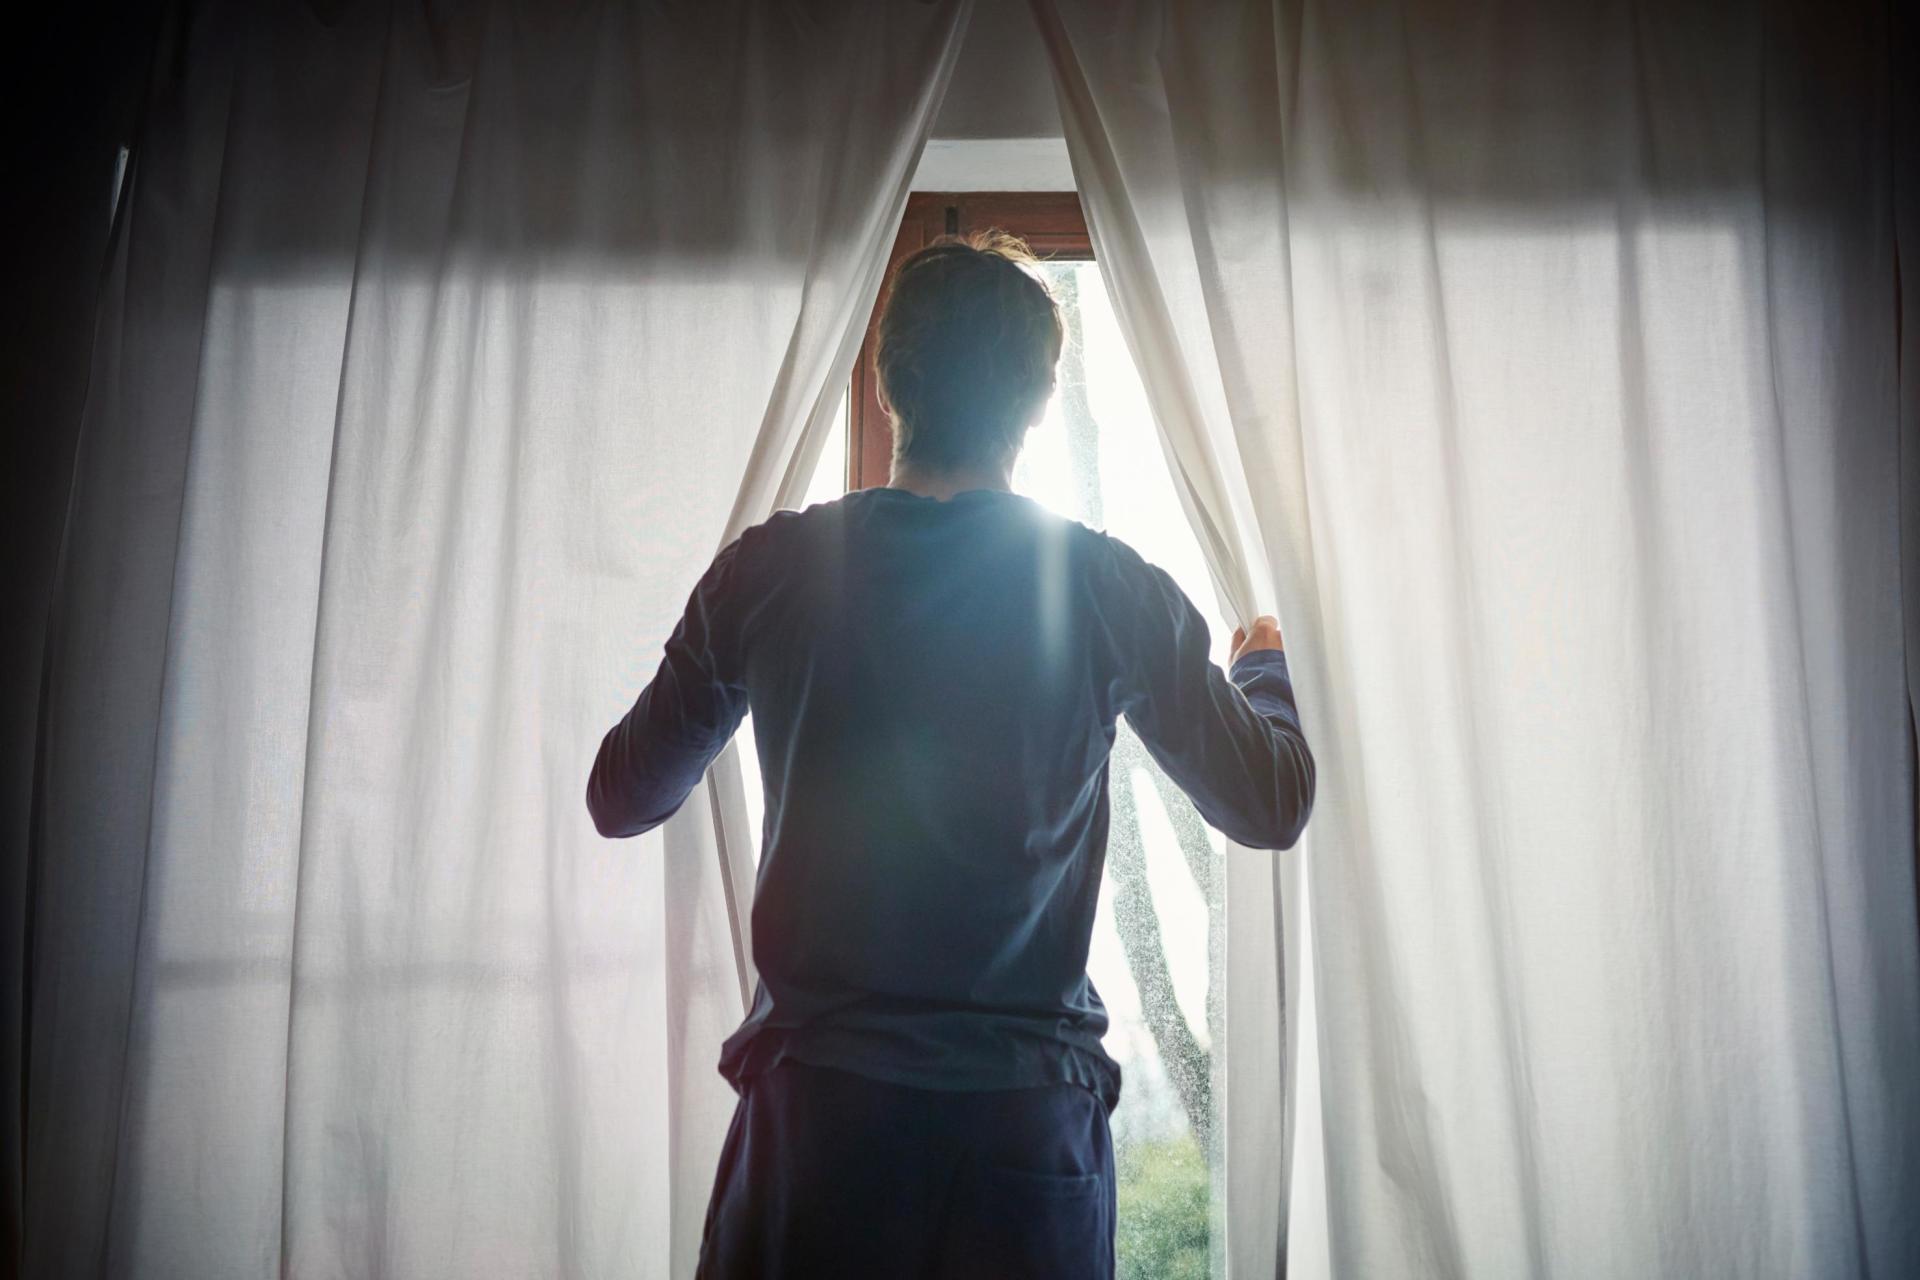 A man opening the curtains to open the window.